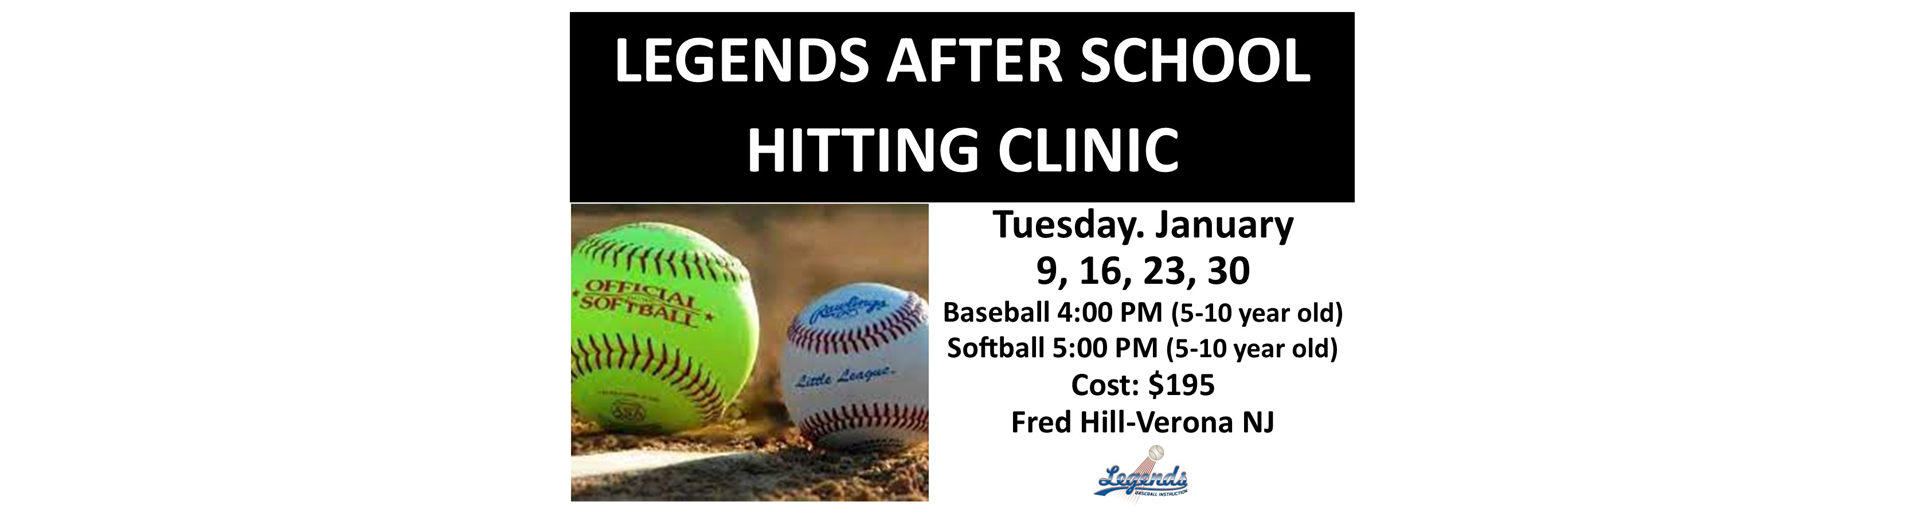 Legends After School Hitting Clinic